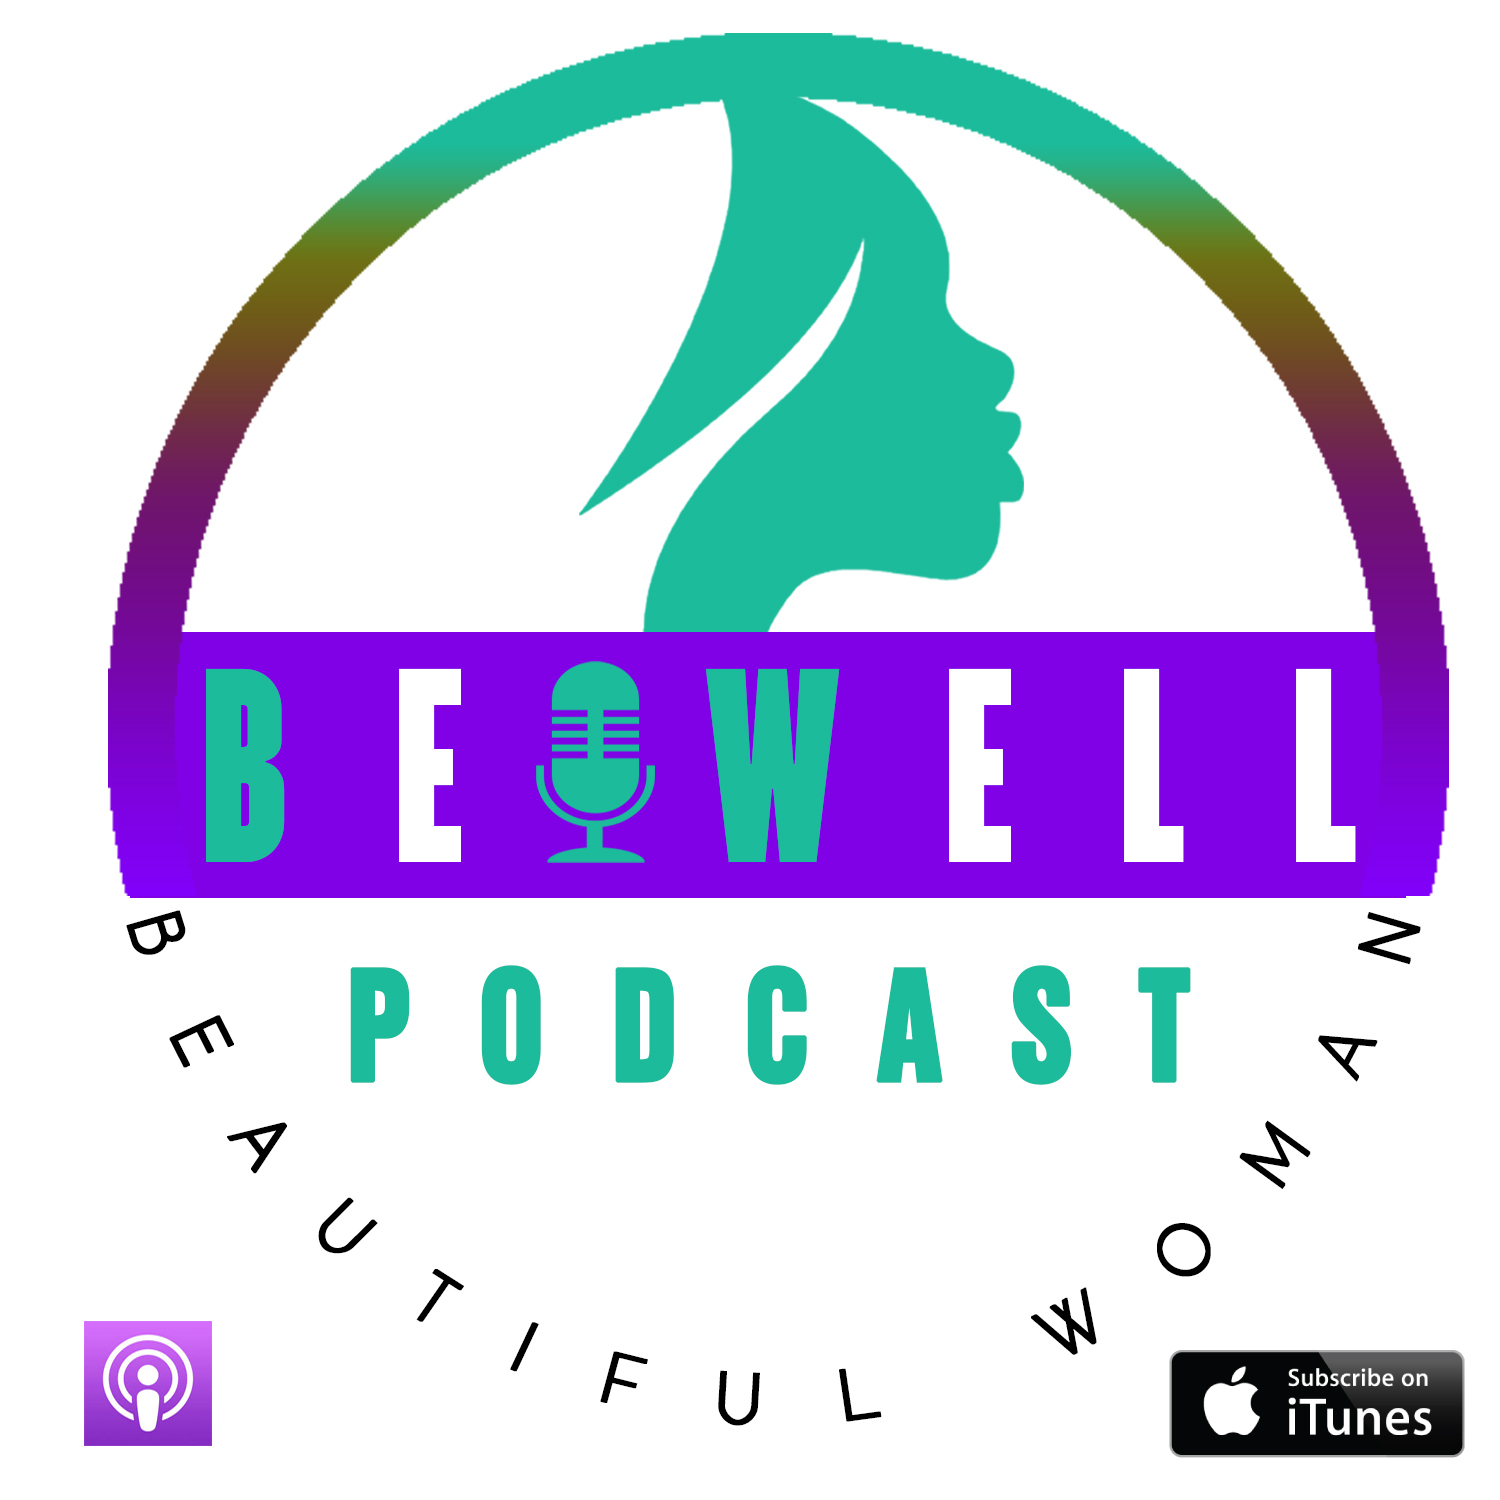 The Be Well Beautiful Woman Podcast